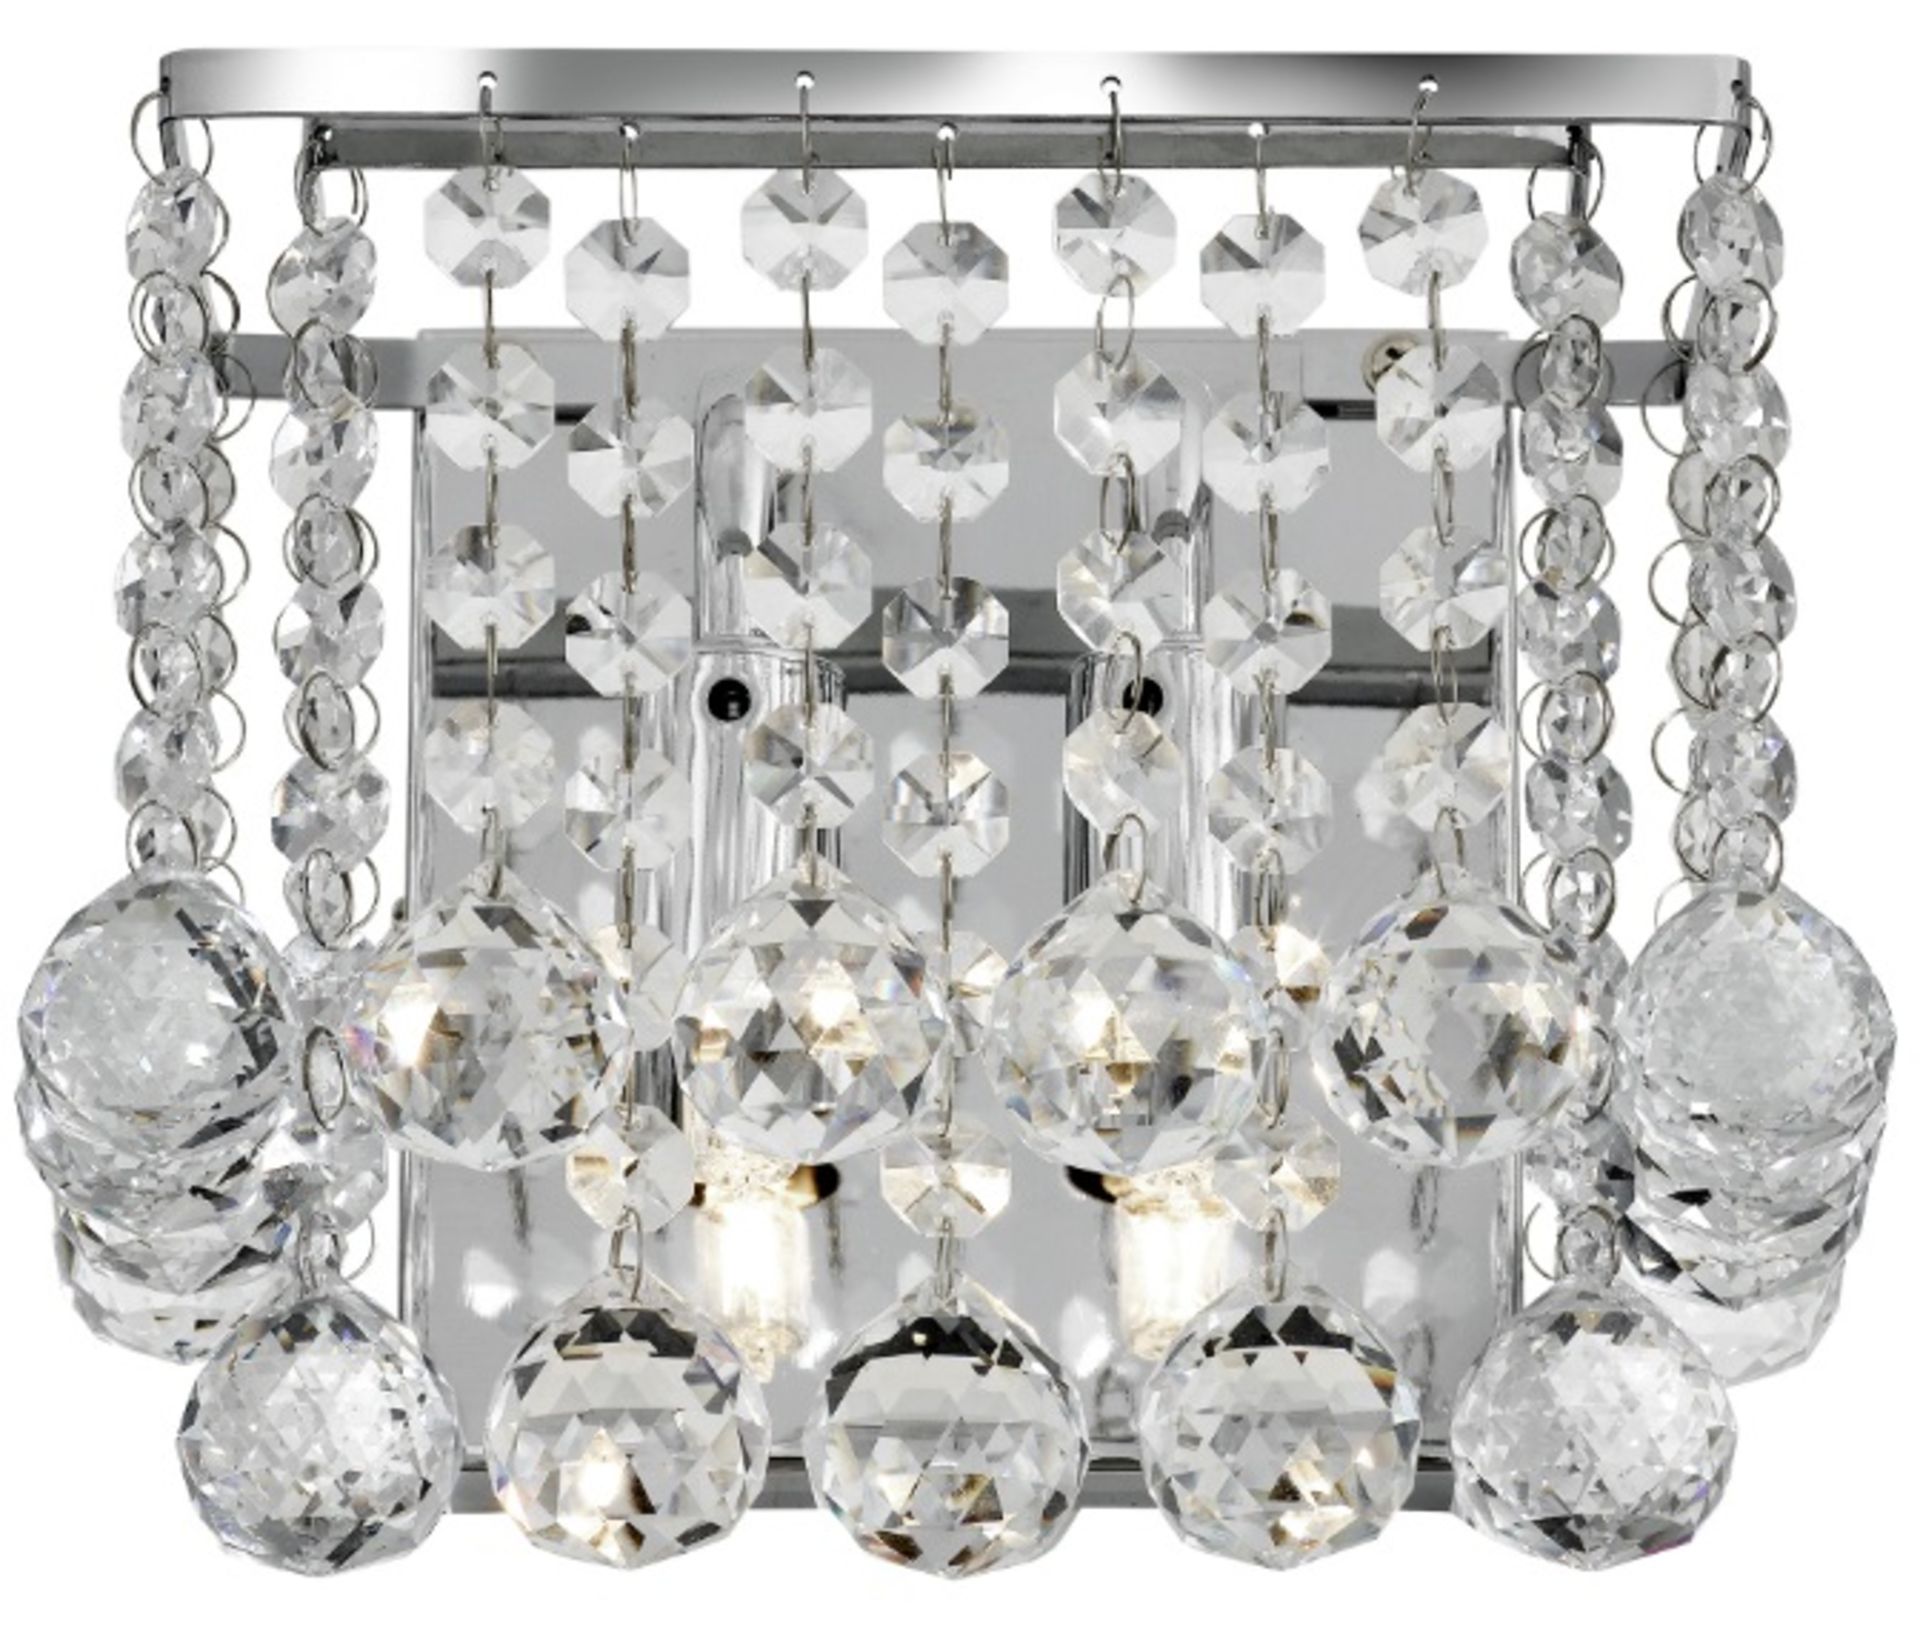 1 x Hanna Chrome 2 Light Square Wall Bracket With Clear Crystal Balls - Ex Display - RRP £67.20